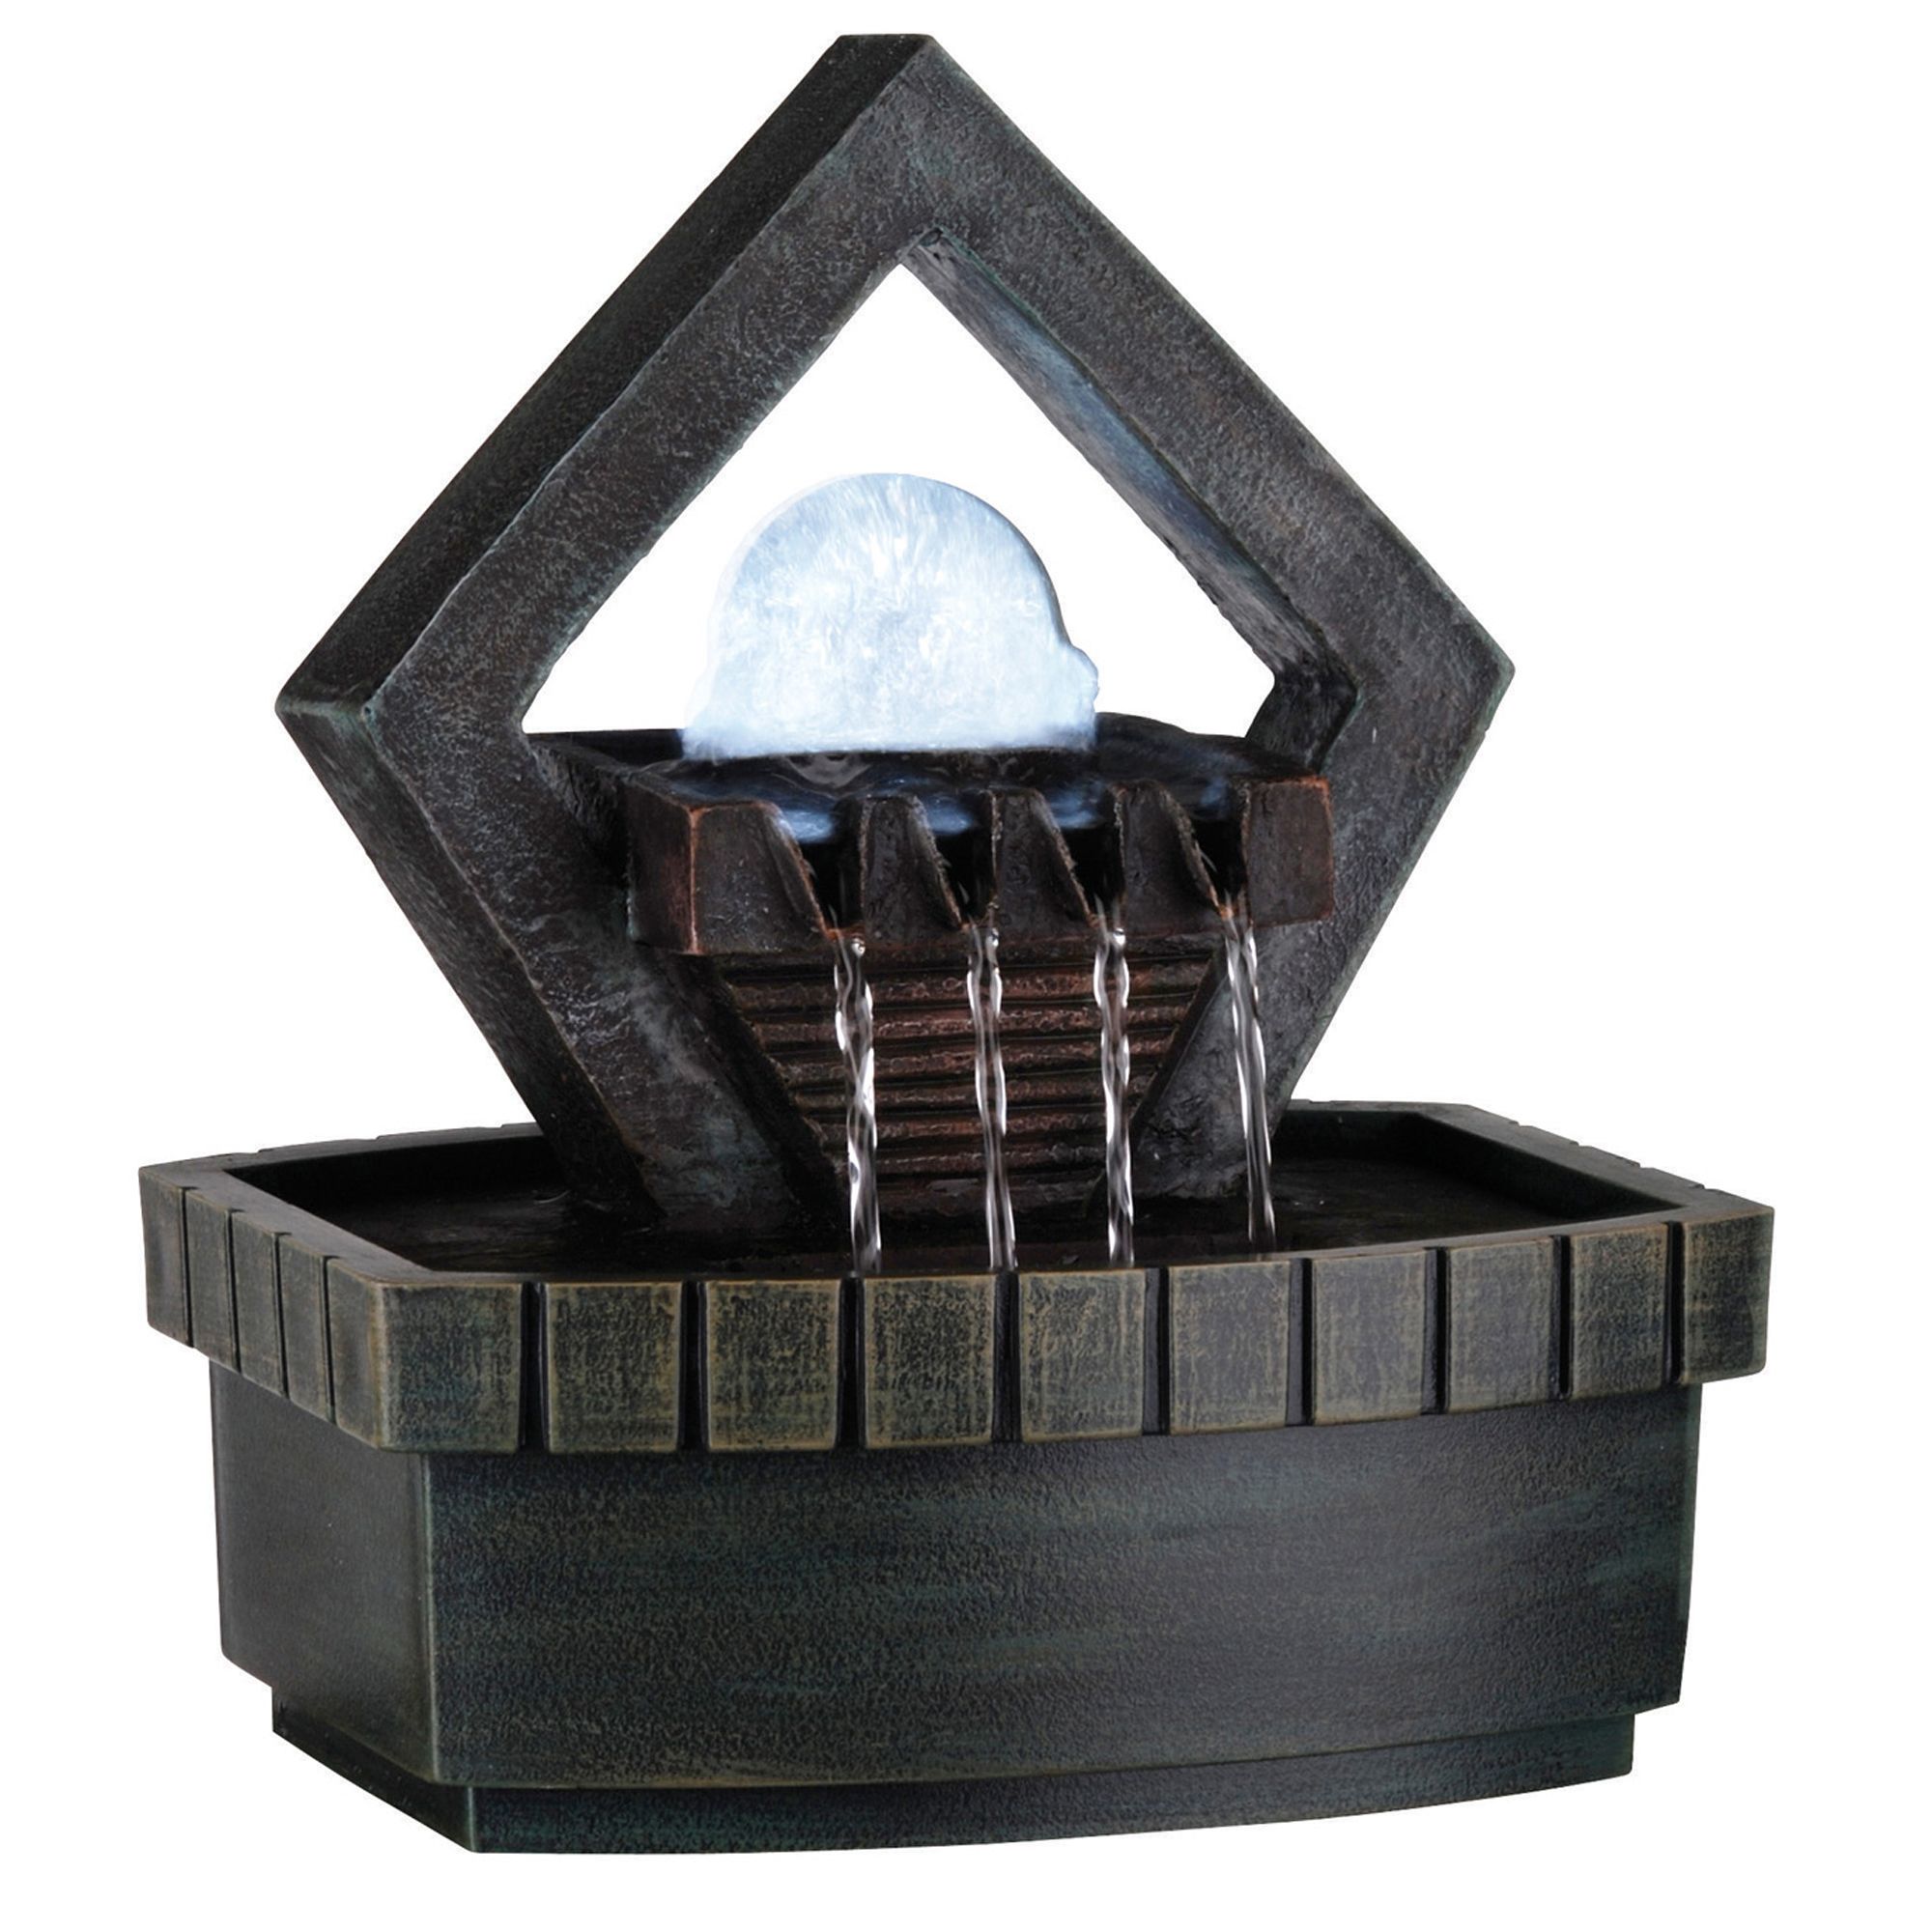 Ore 9.5" Meditation Fountain with LED Light